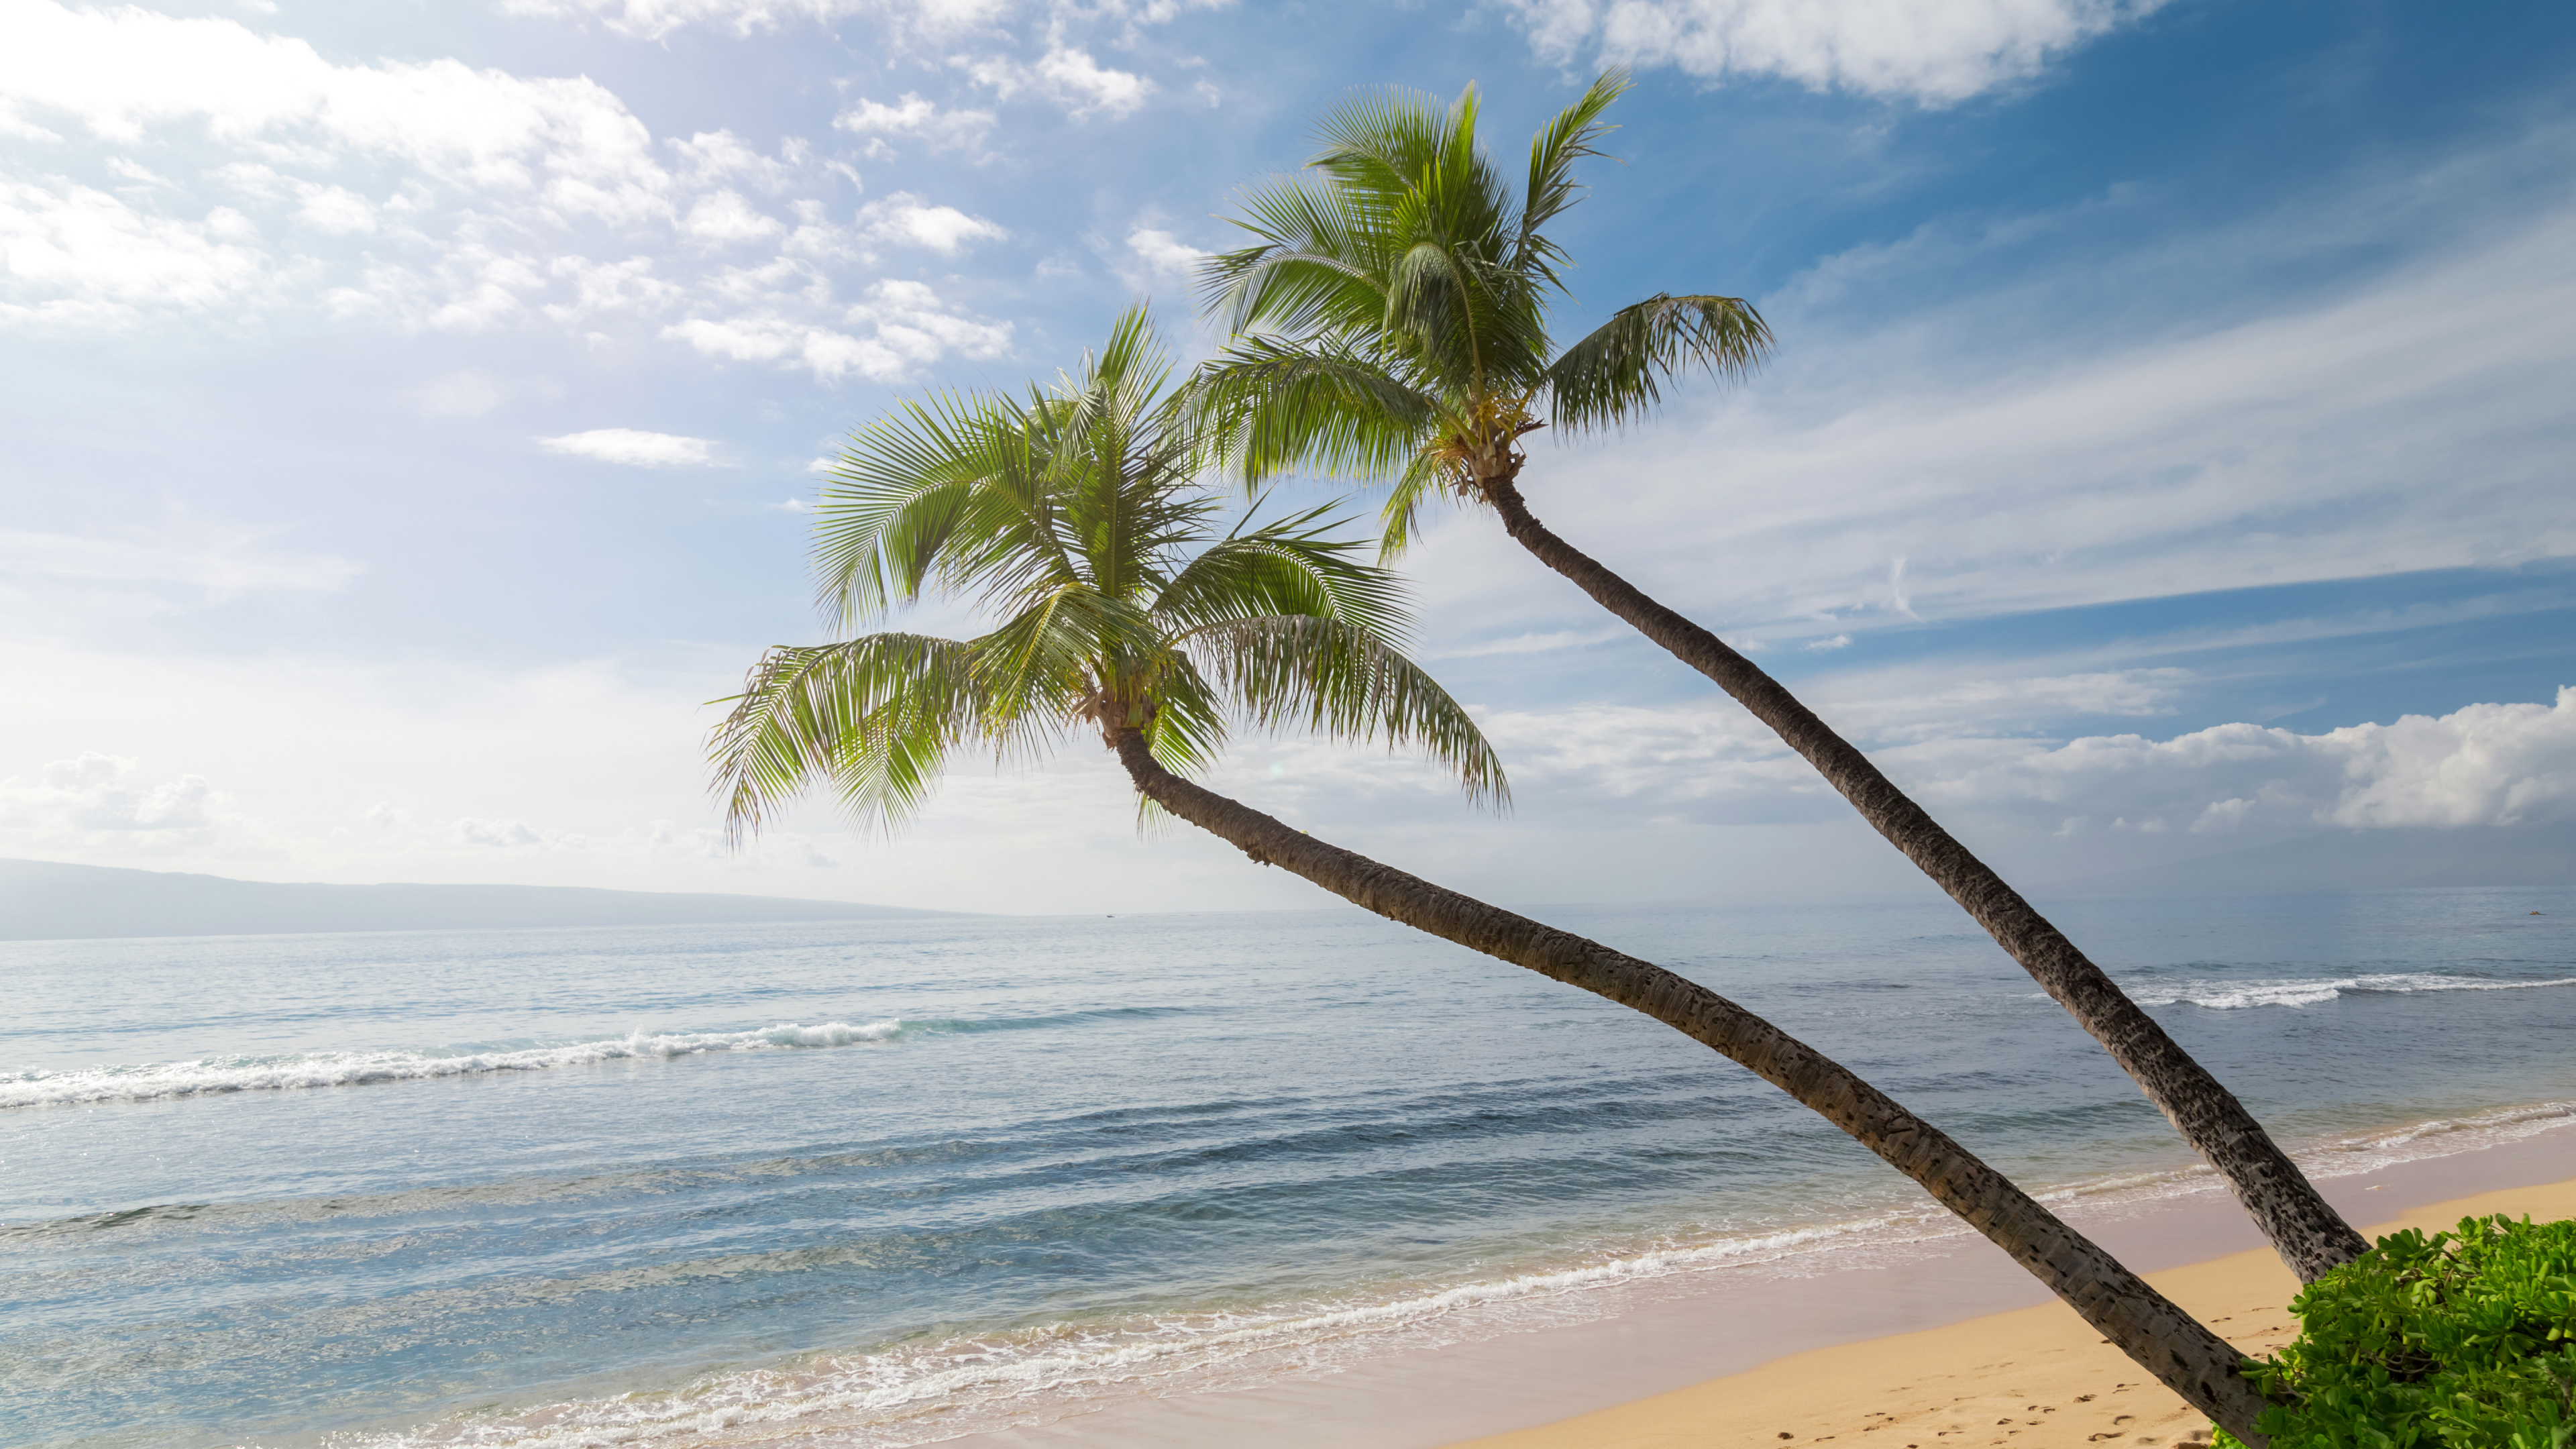 Palm Tree on Beach Shore During Daytime. Wallpaper in 3840x2160 Resolution